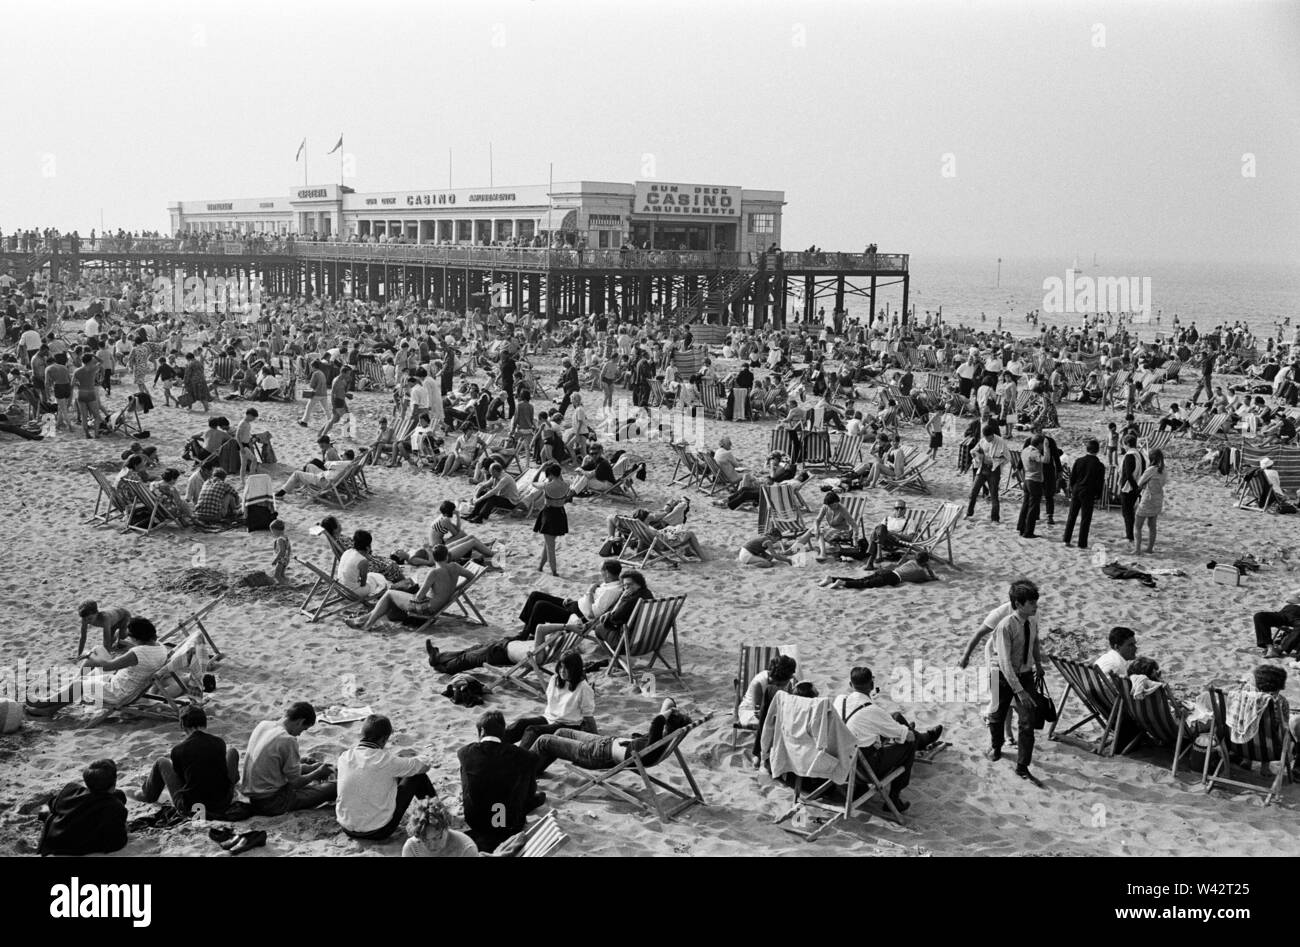 Bank holiday scenes at Margate, Kent. 27th August 1967. Stock Photo